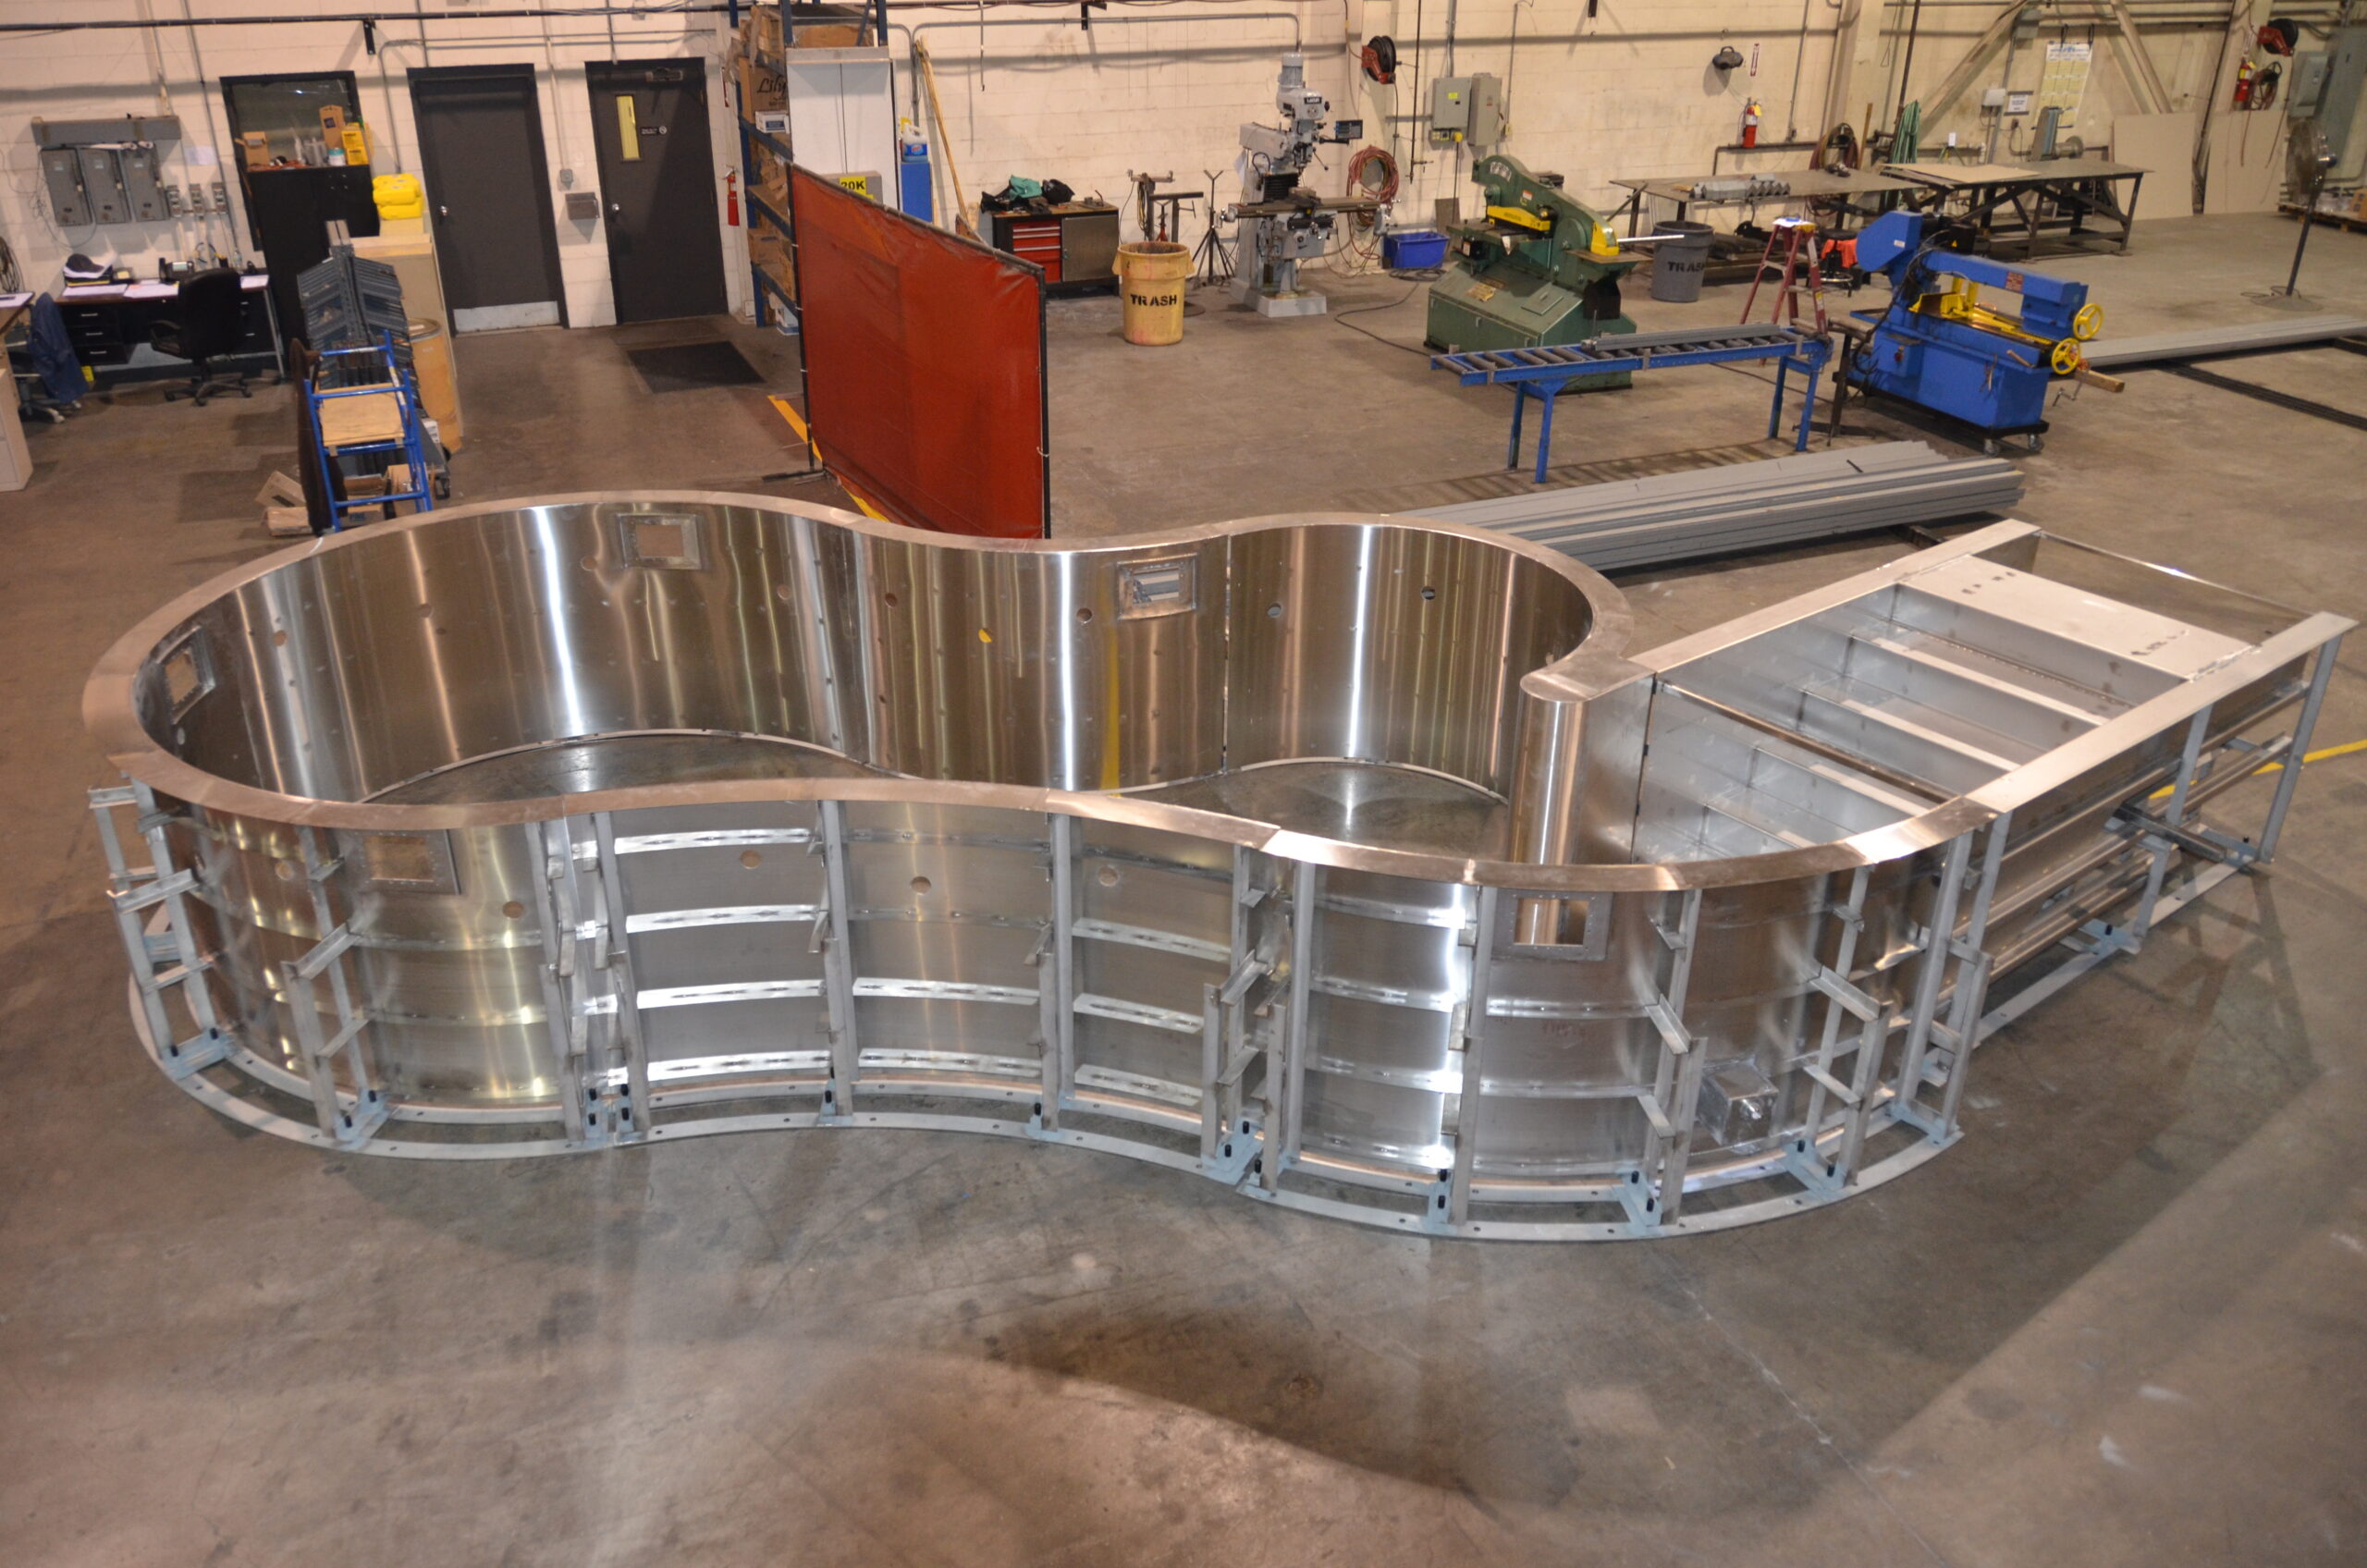 stainless steel pool being fabricated in shop